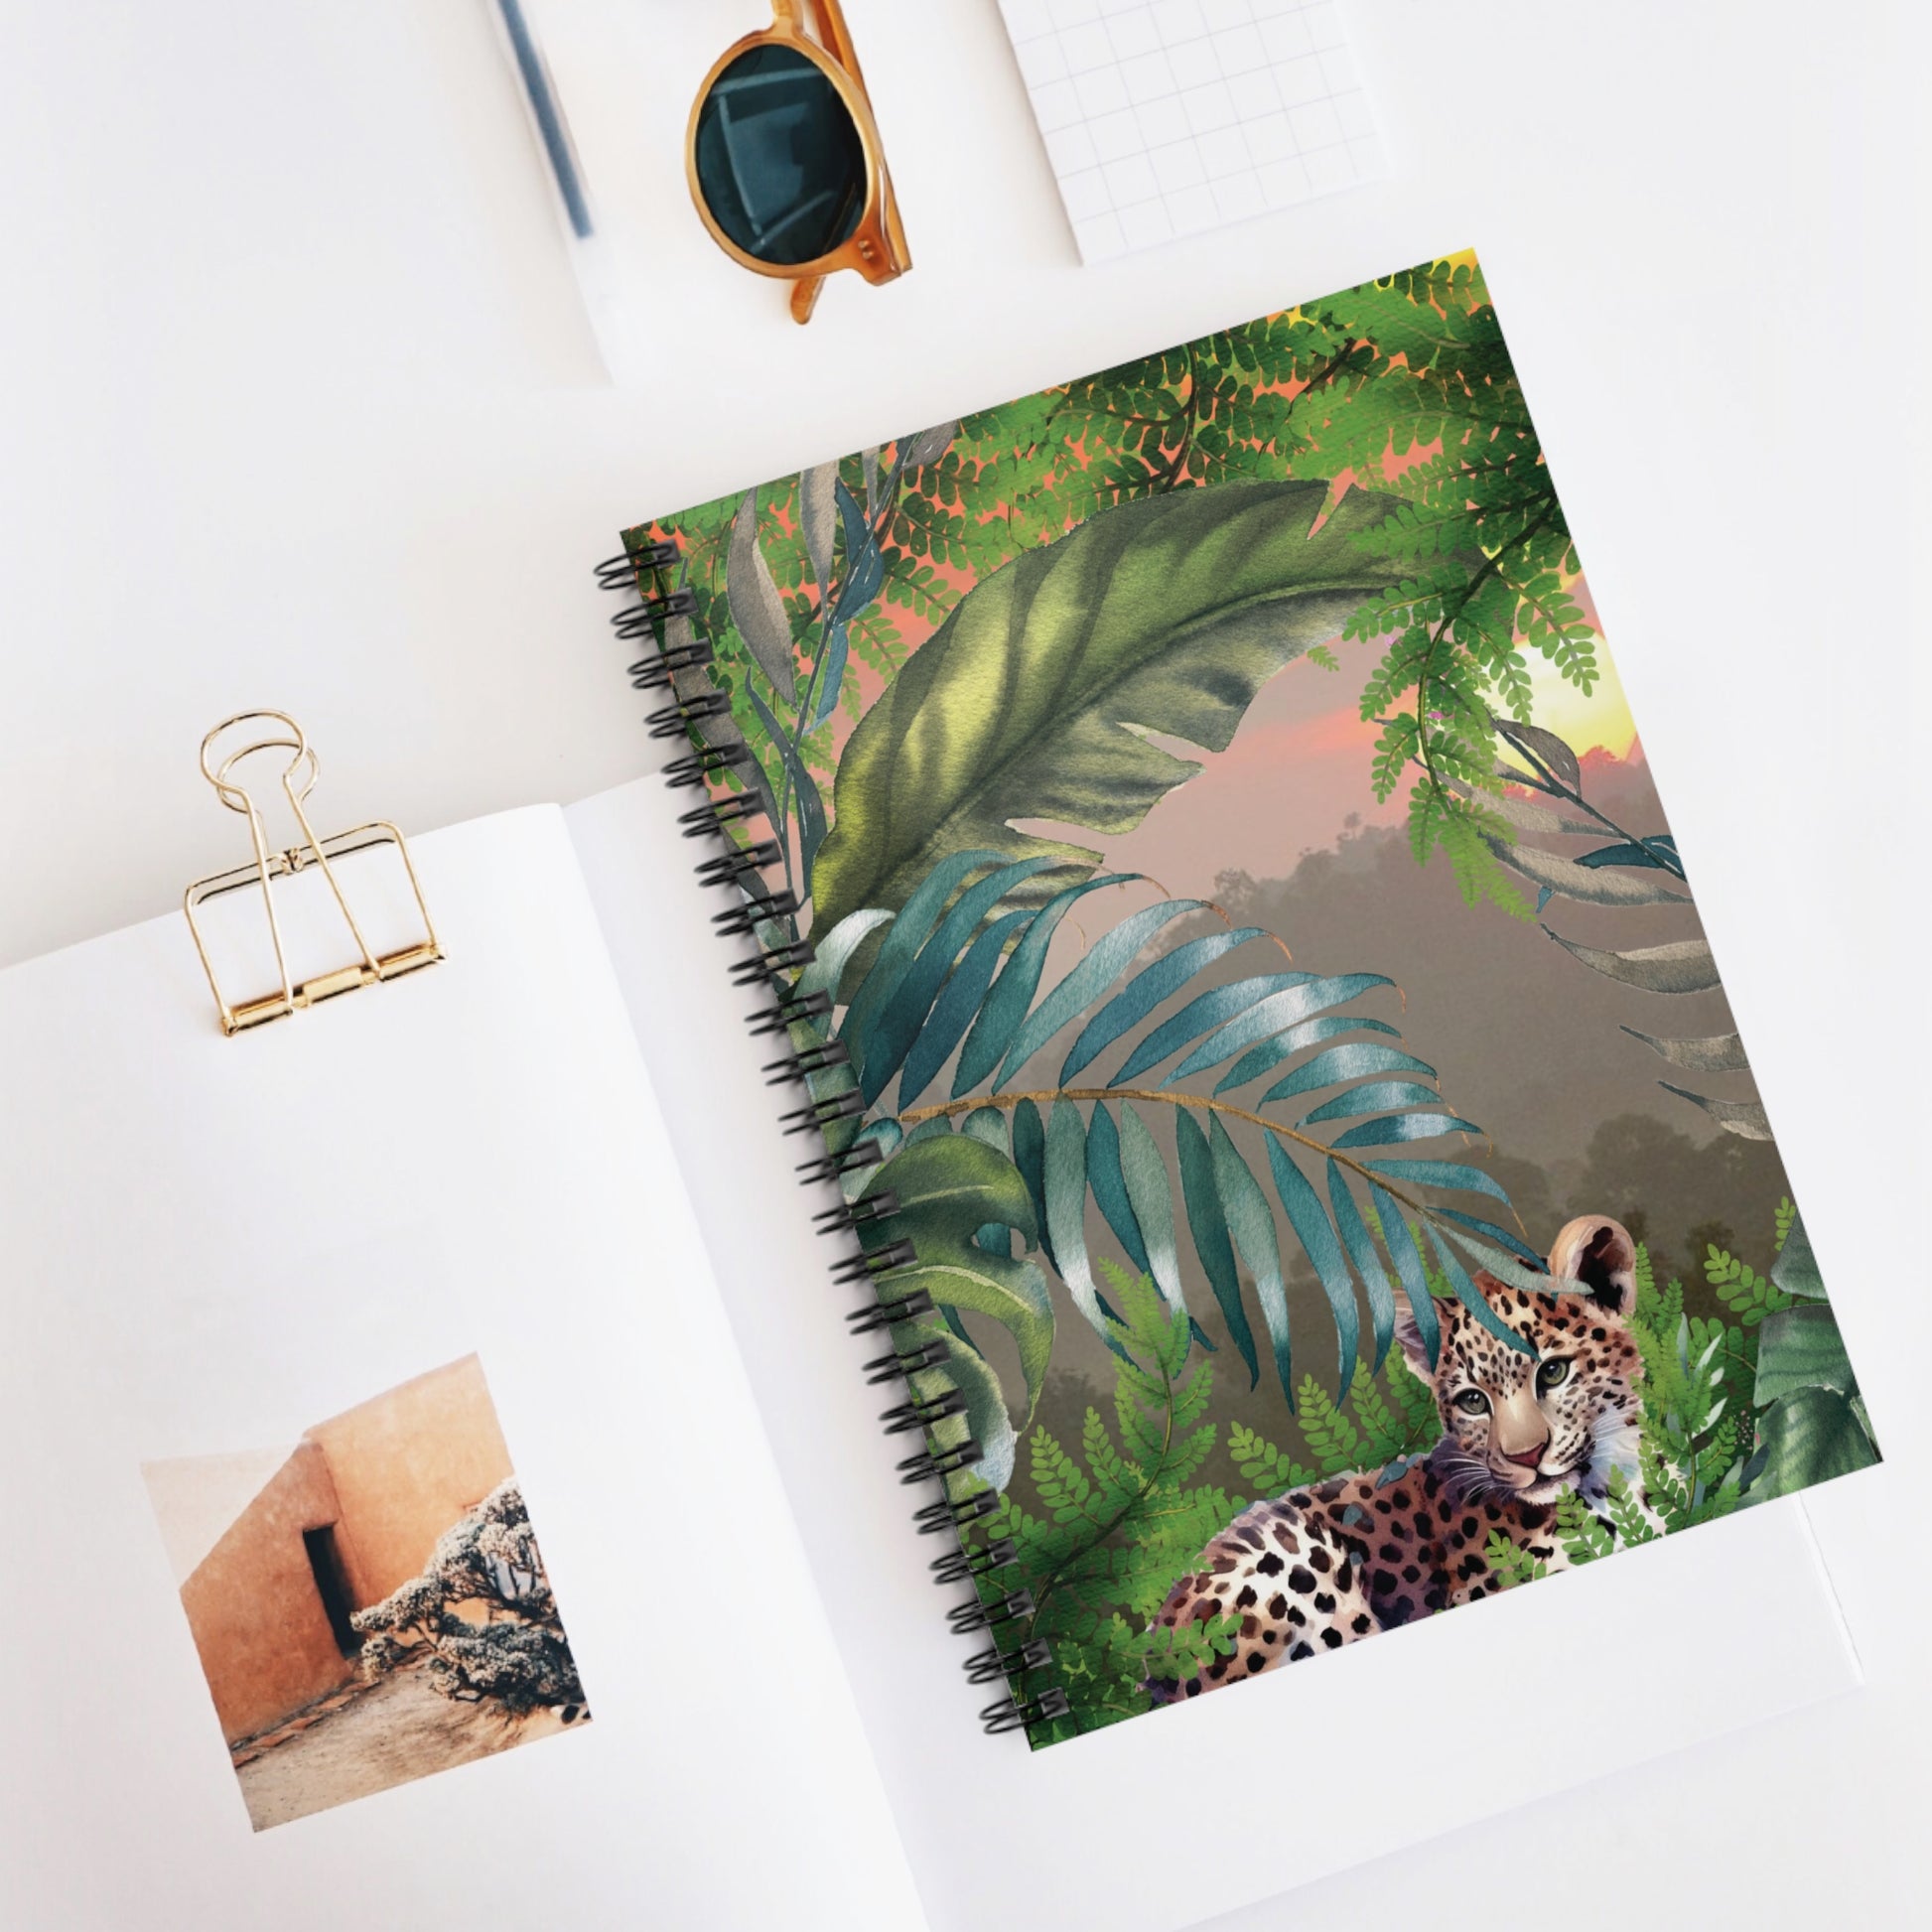 Jungle Tiger Cub: Spiral Notebook - Log Books - Journals - Diaries - and More Custom Printed by TheGlassyLass